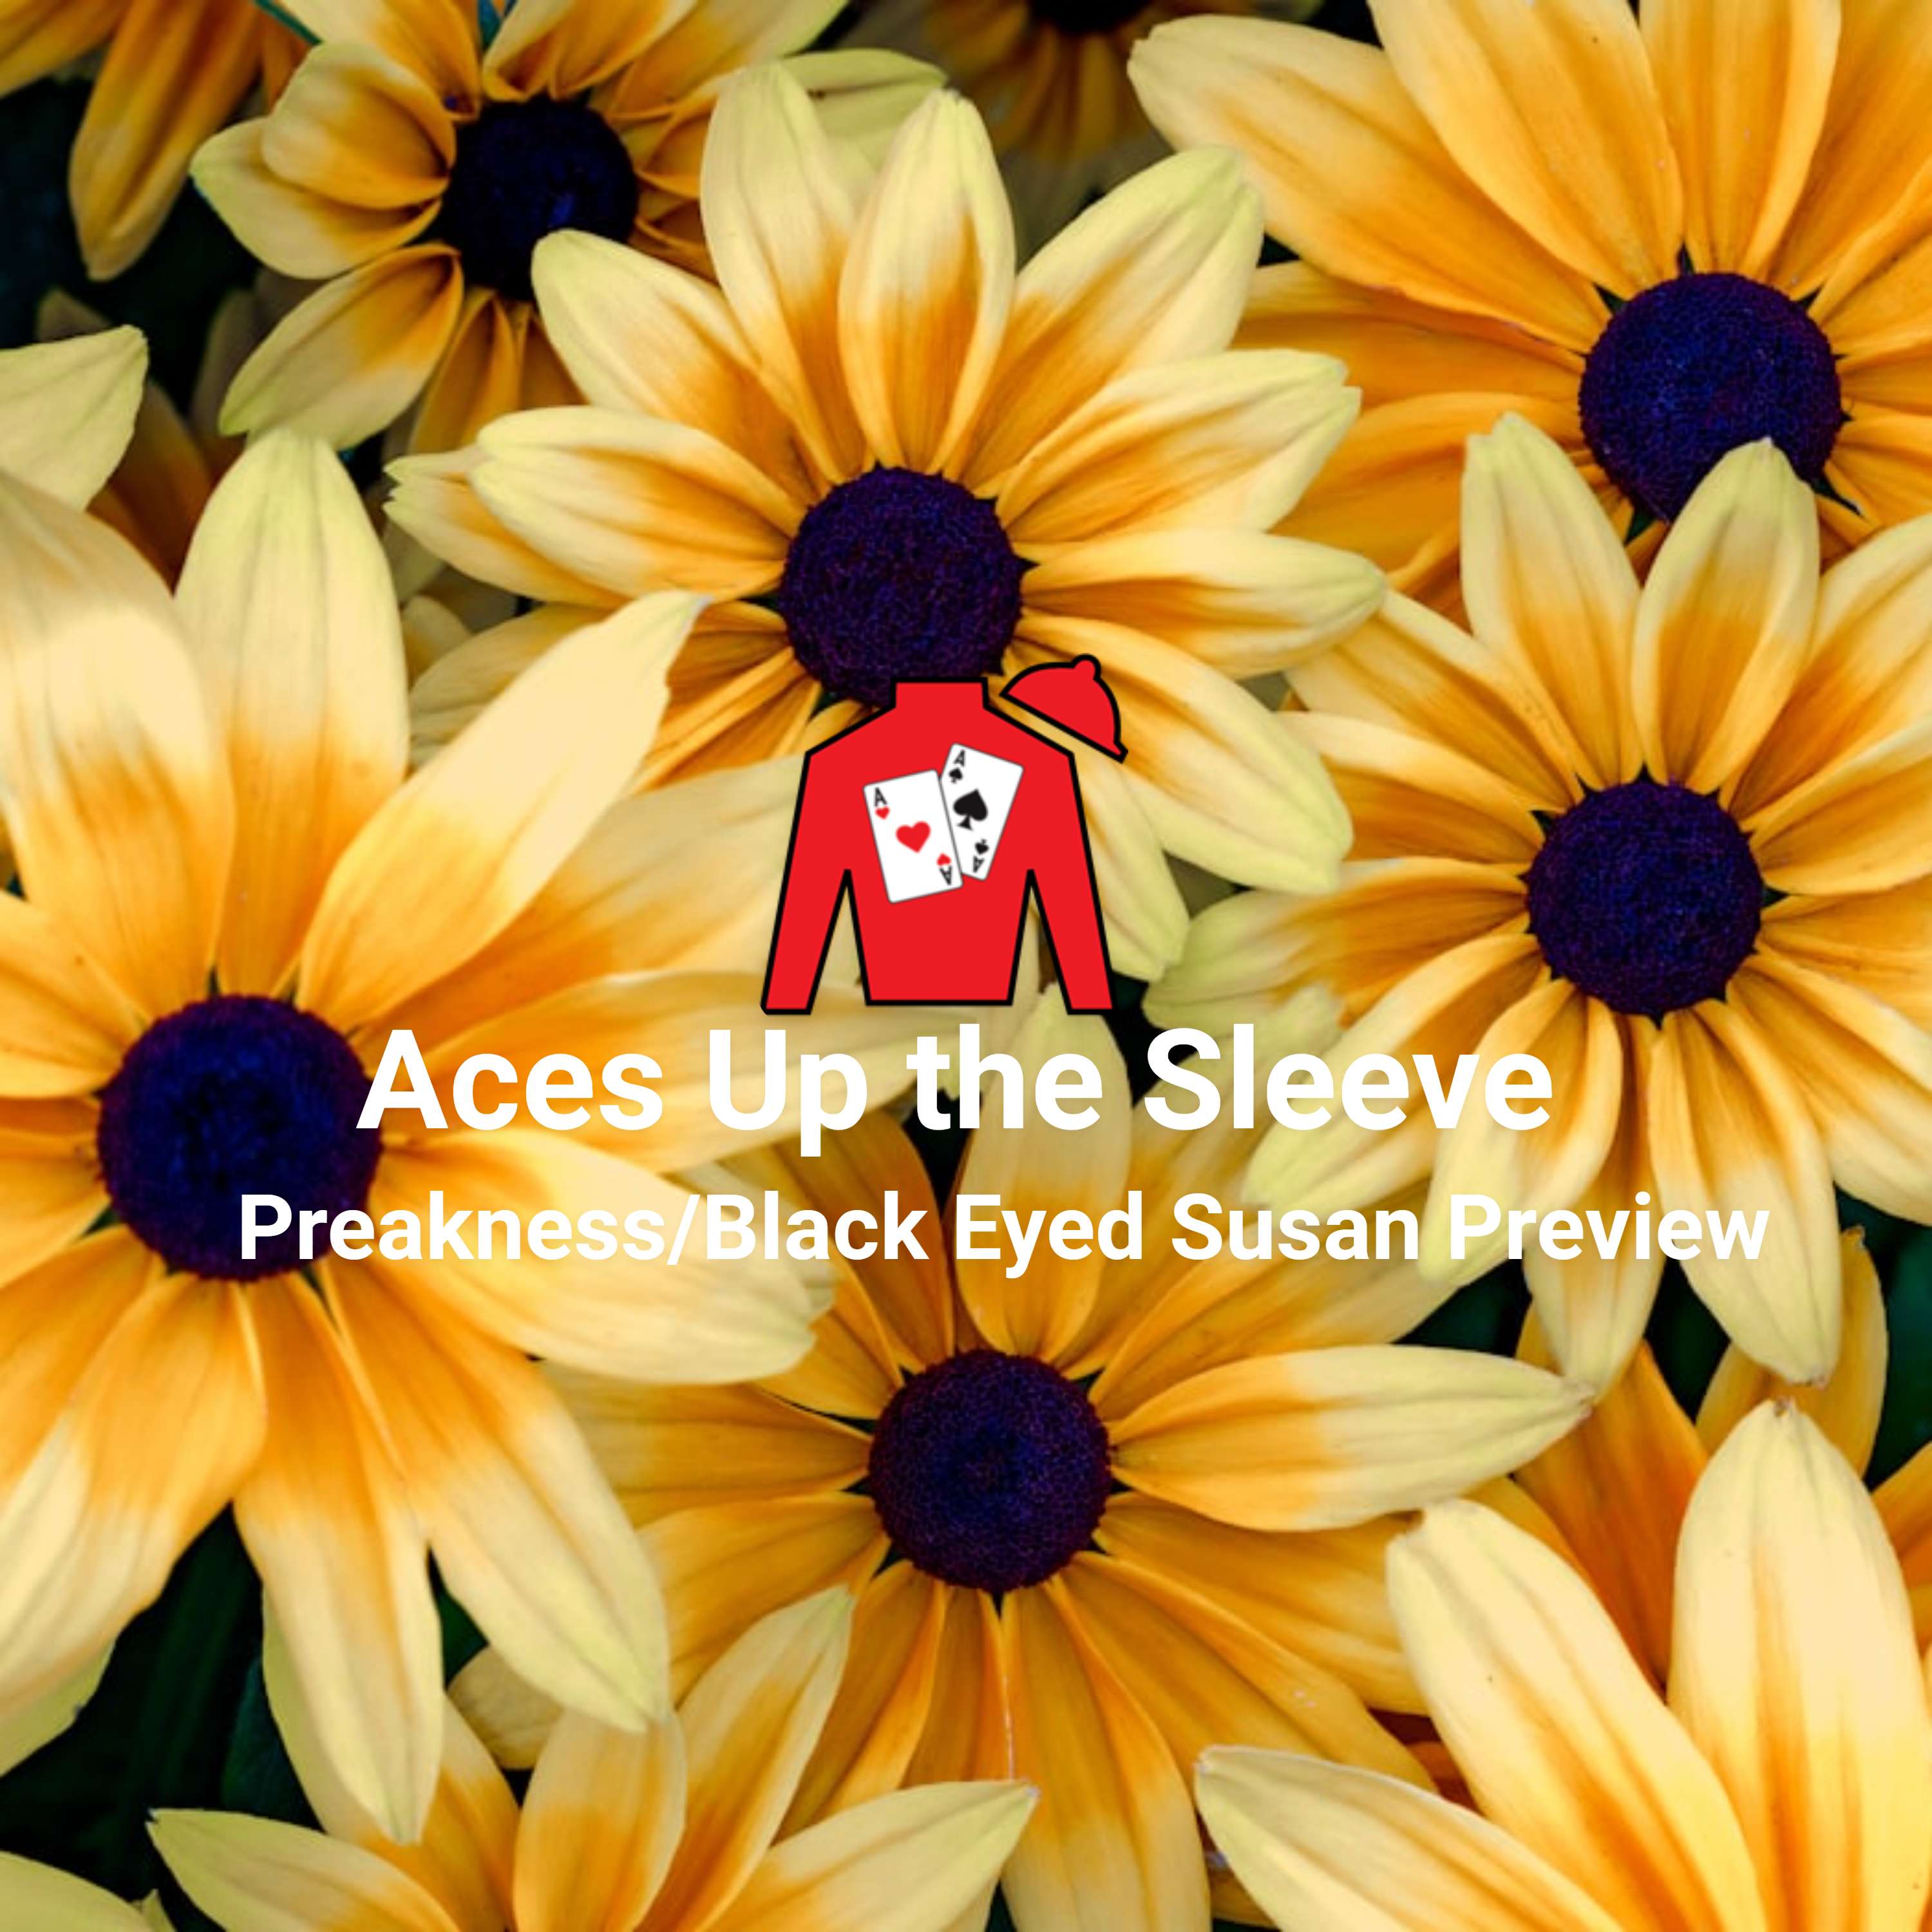 Preakness/Black-Eyed Susan Preview